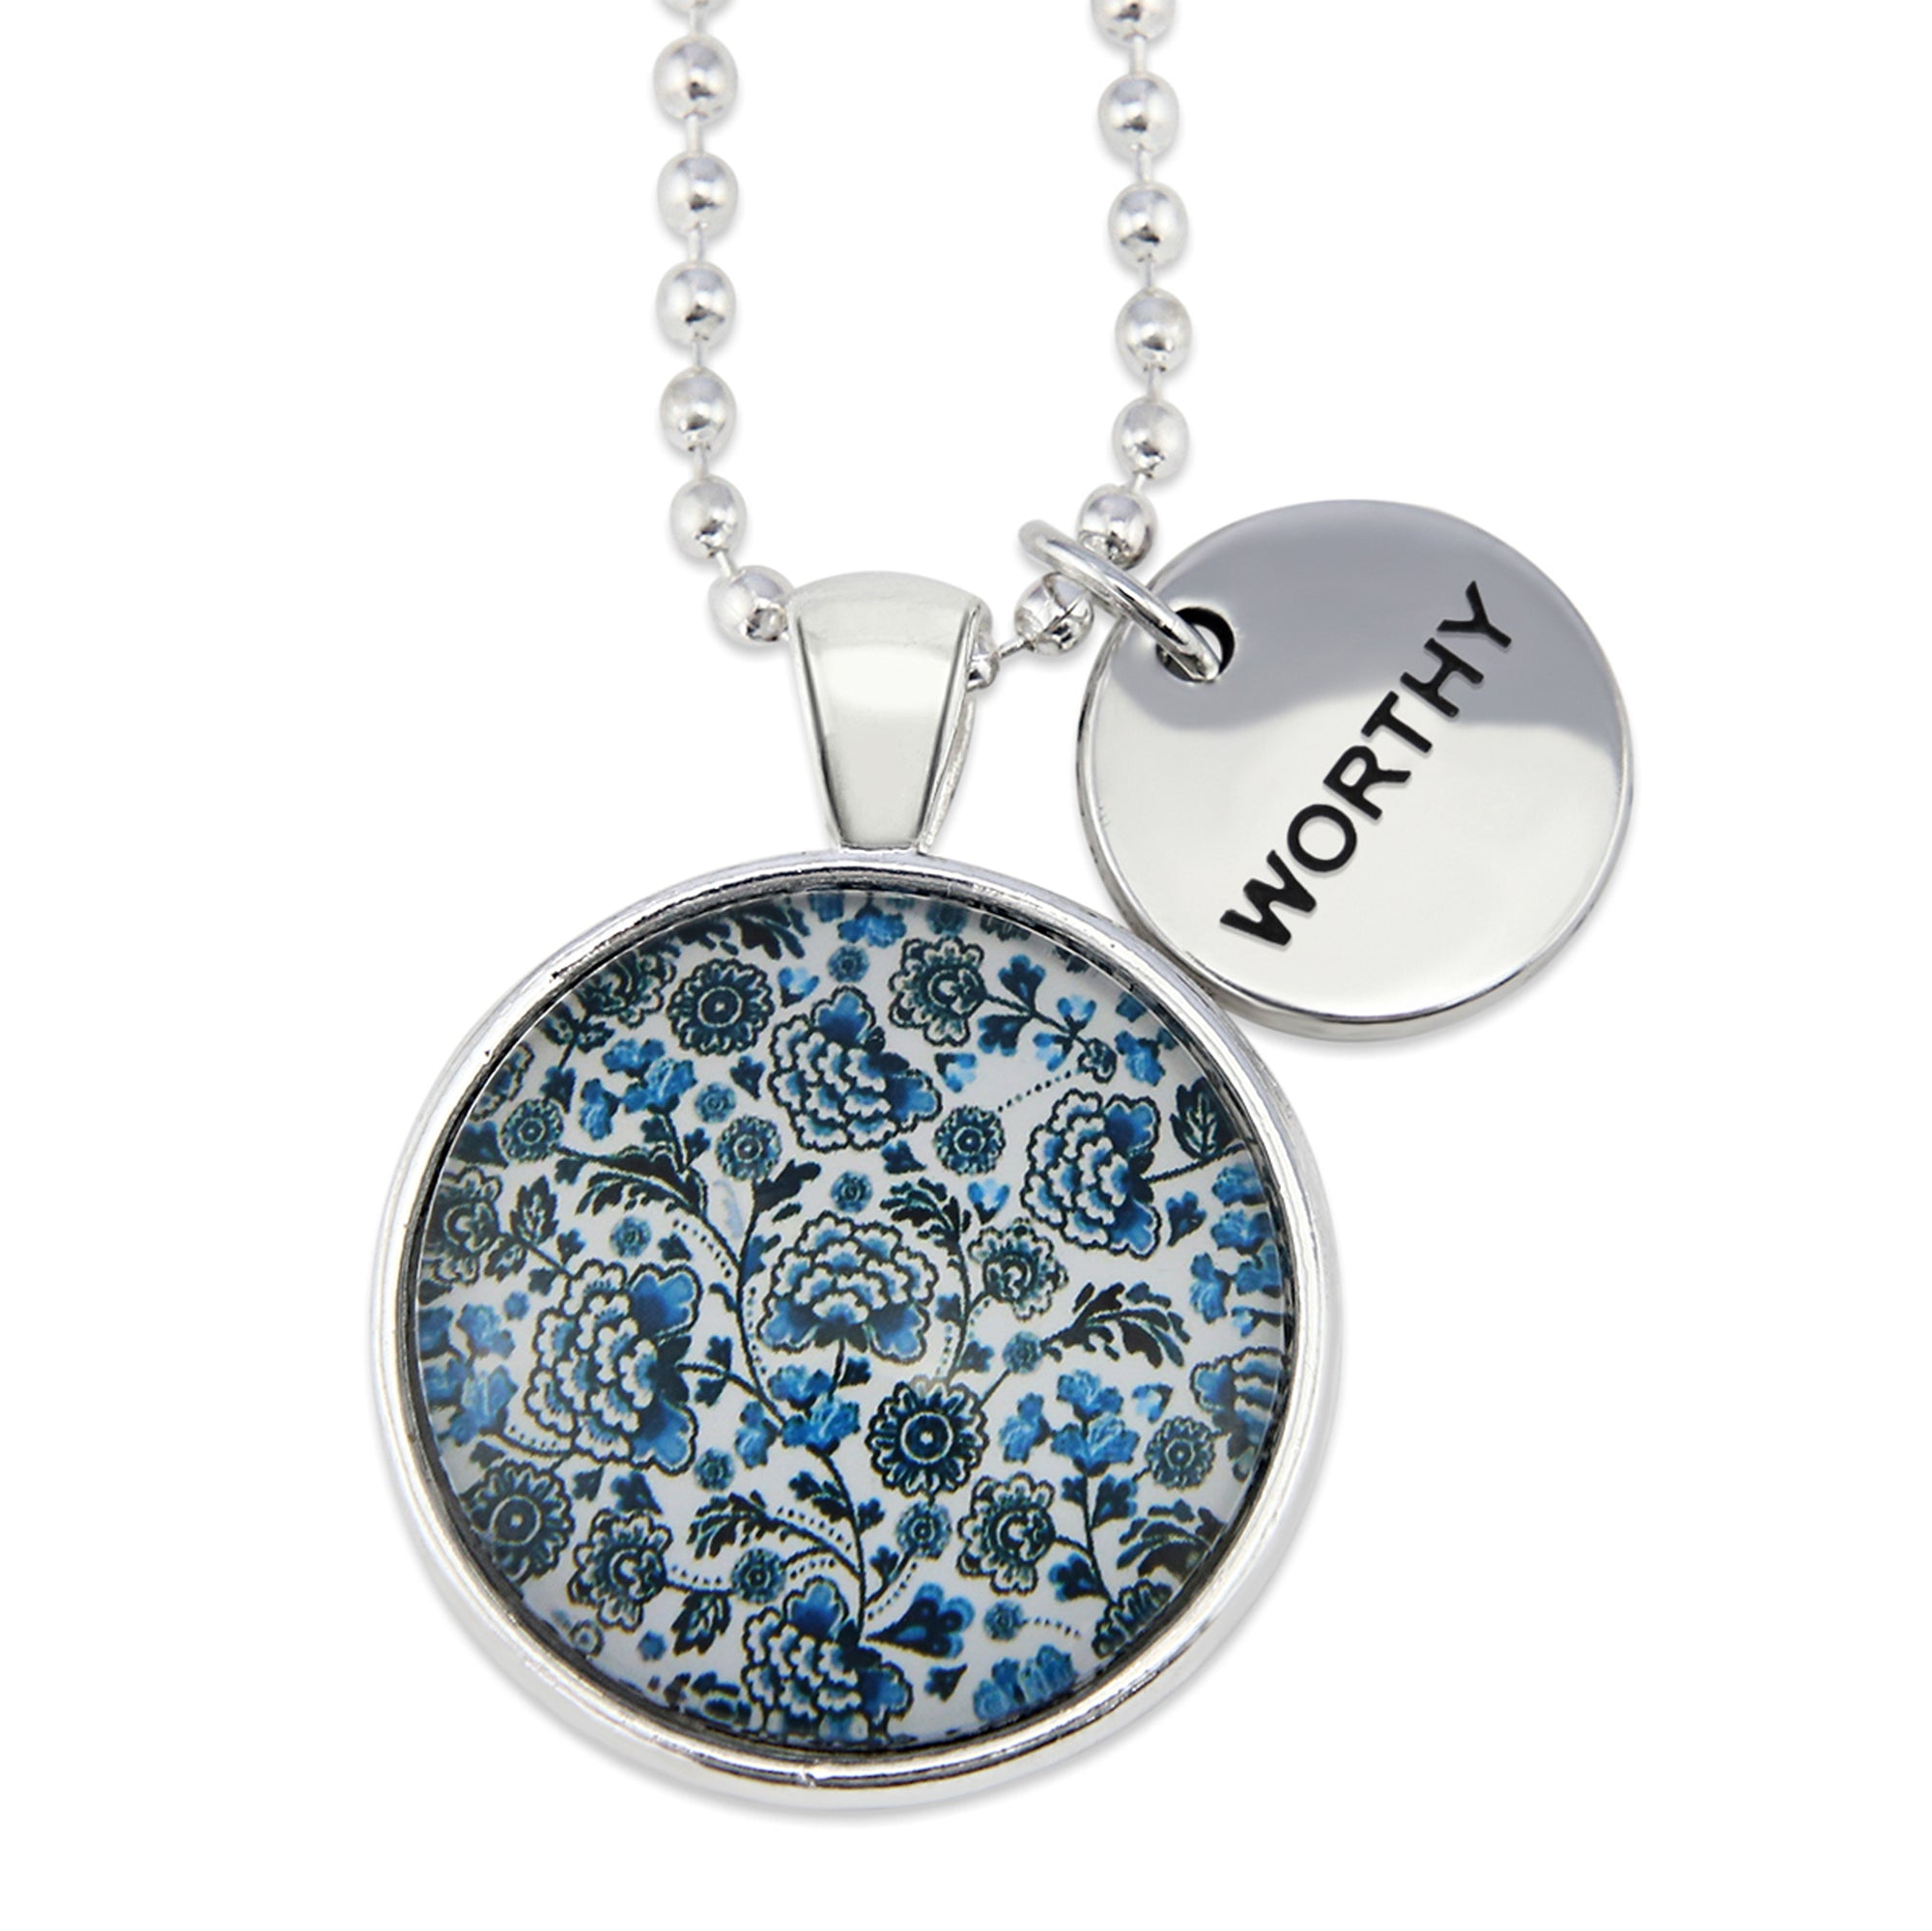 Blue Collection - Bright Silver 'WORTHY' Necklace - Blue Danube (11151)